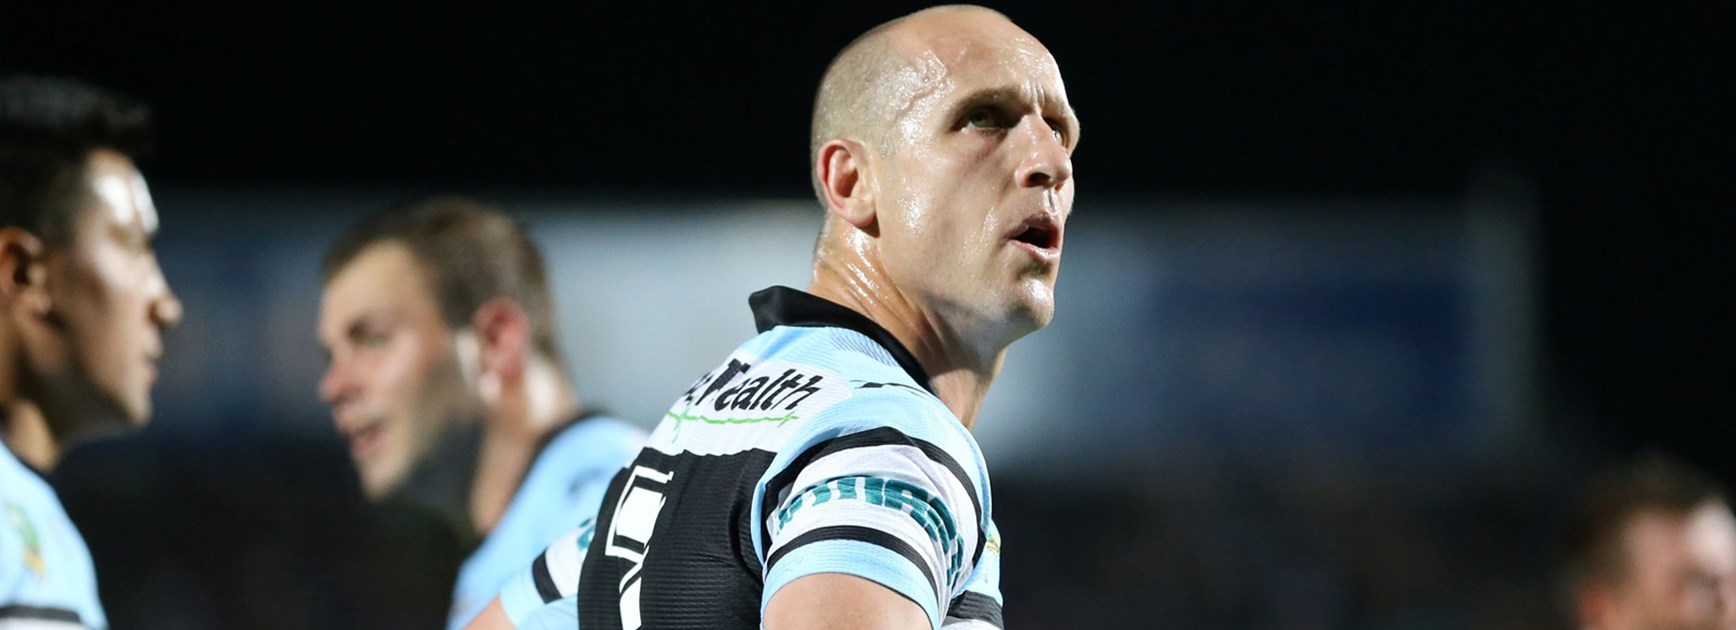 Jeff Robson has completed an off-season switch to the Warriors, signing a one-year deal.